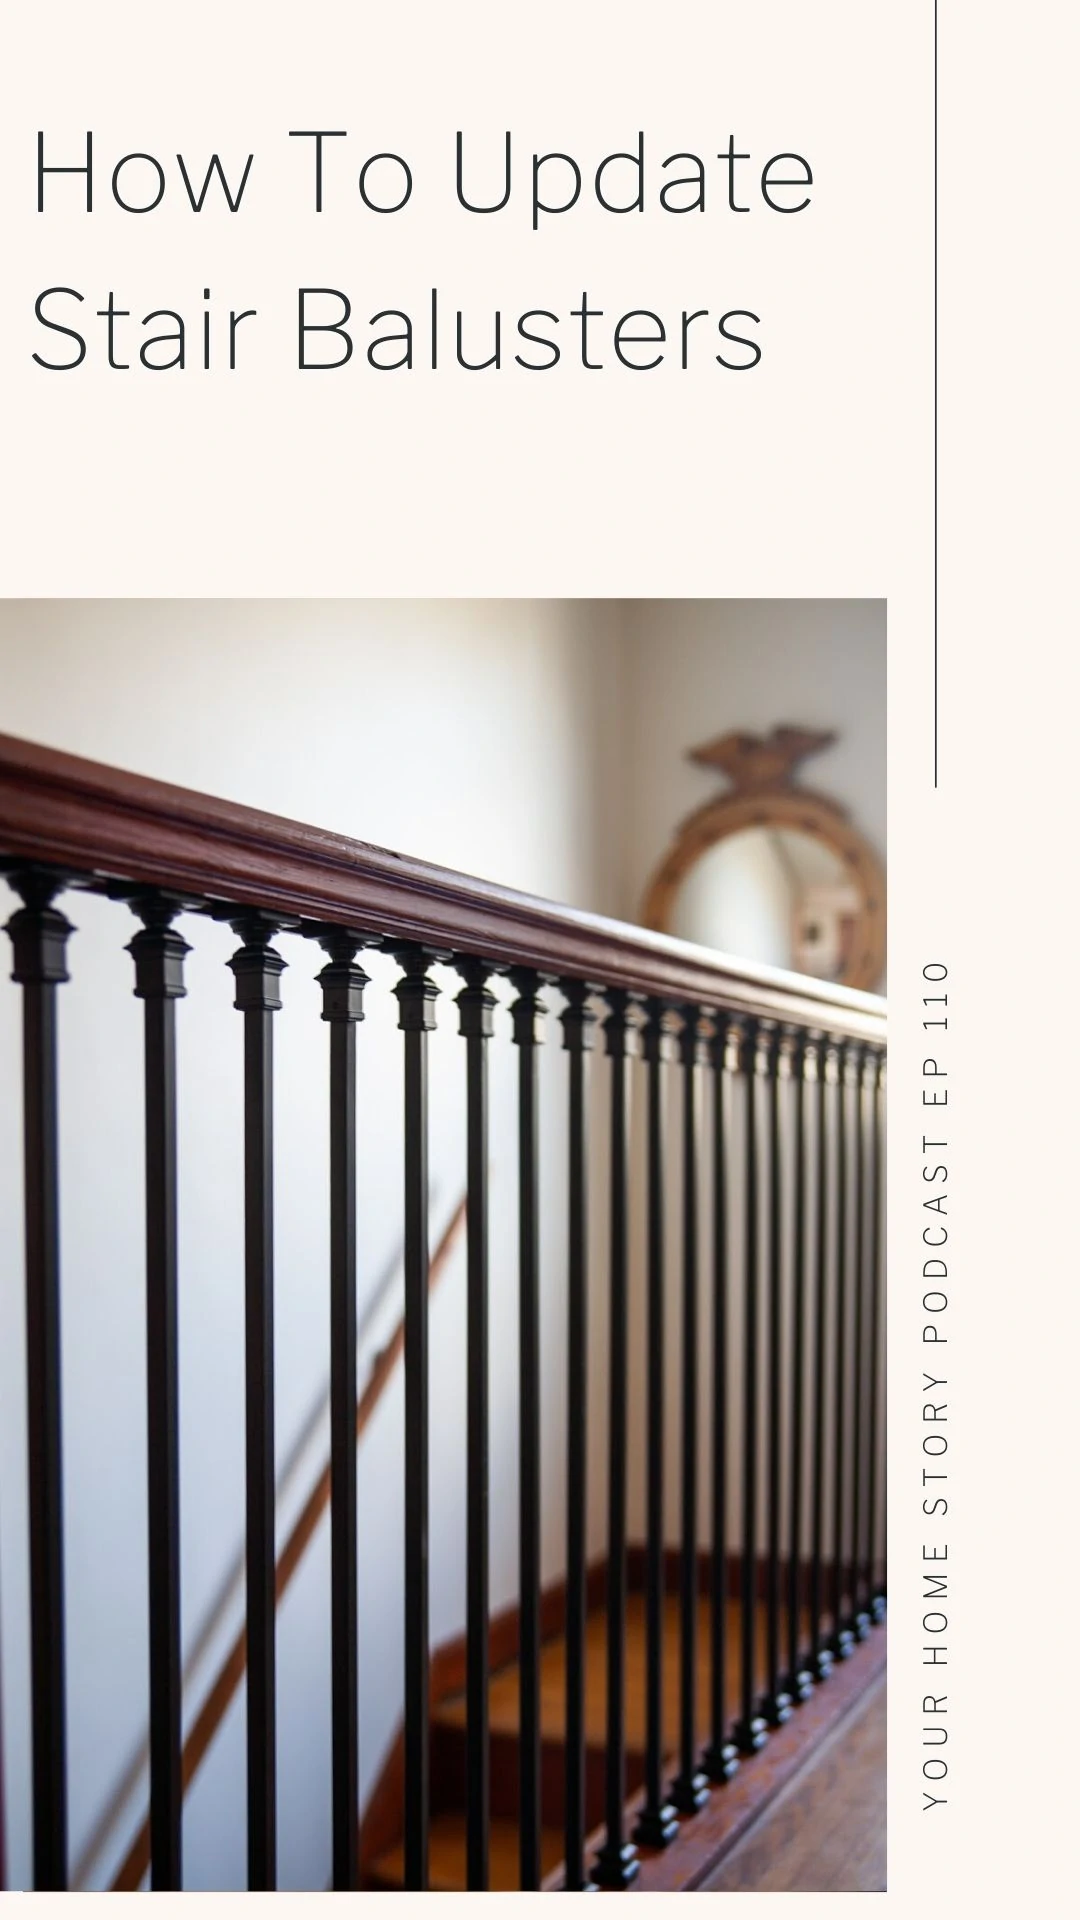 DIY for updating stair balusters